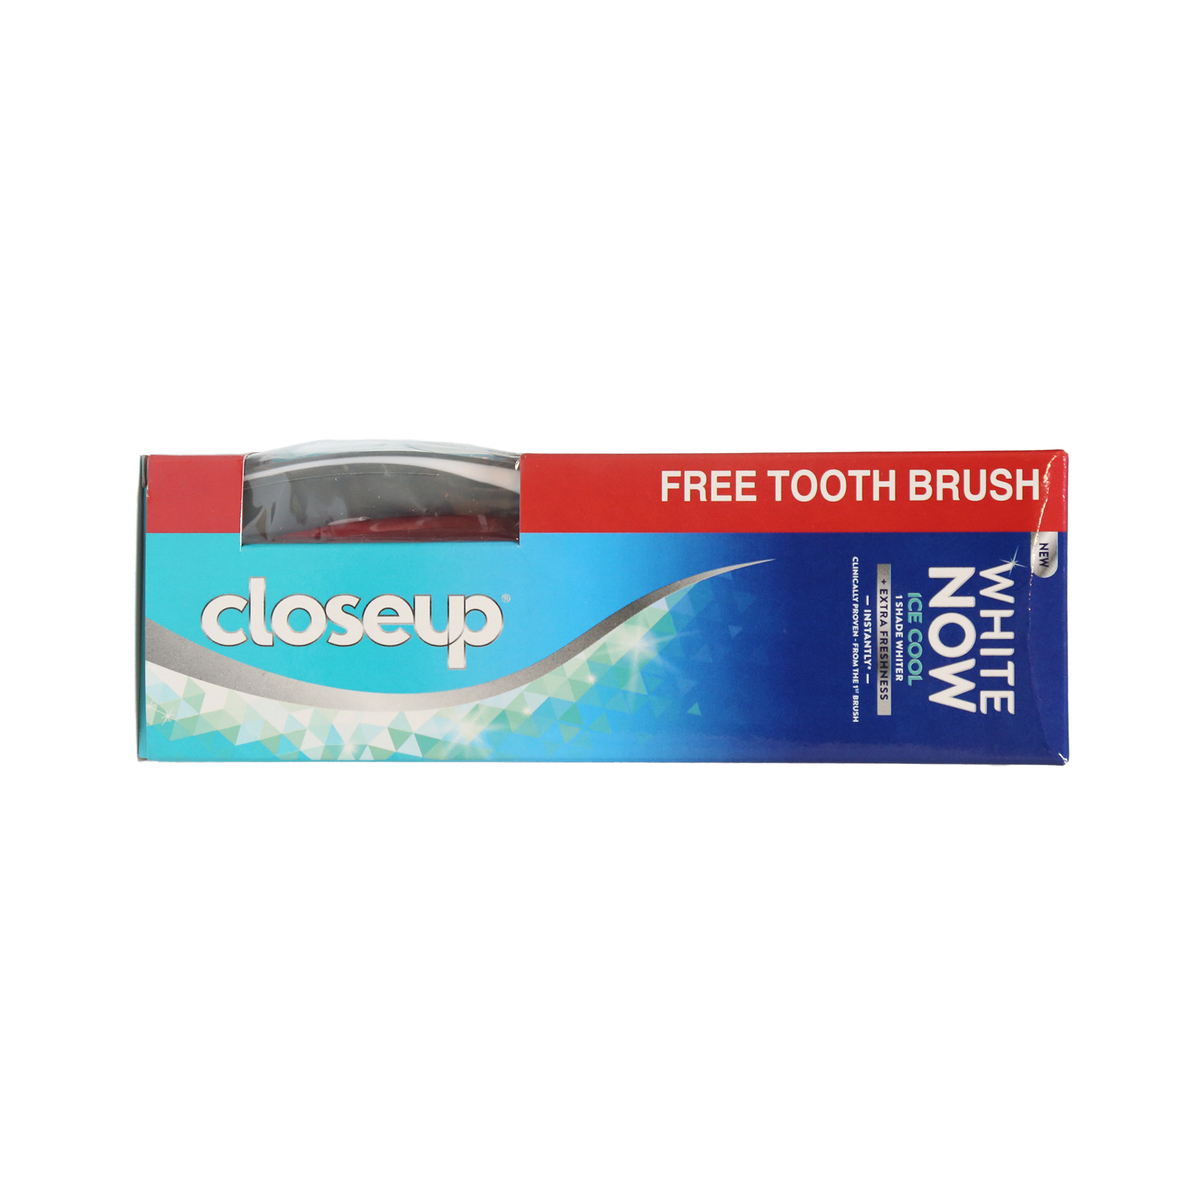 Close Up White Now Ice Cool Toothpaste 75ml Toothbrush 1pc Online At Best Price Tooth Paste 2201